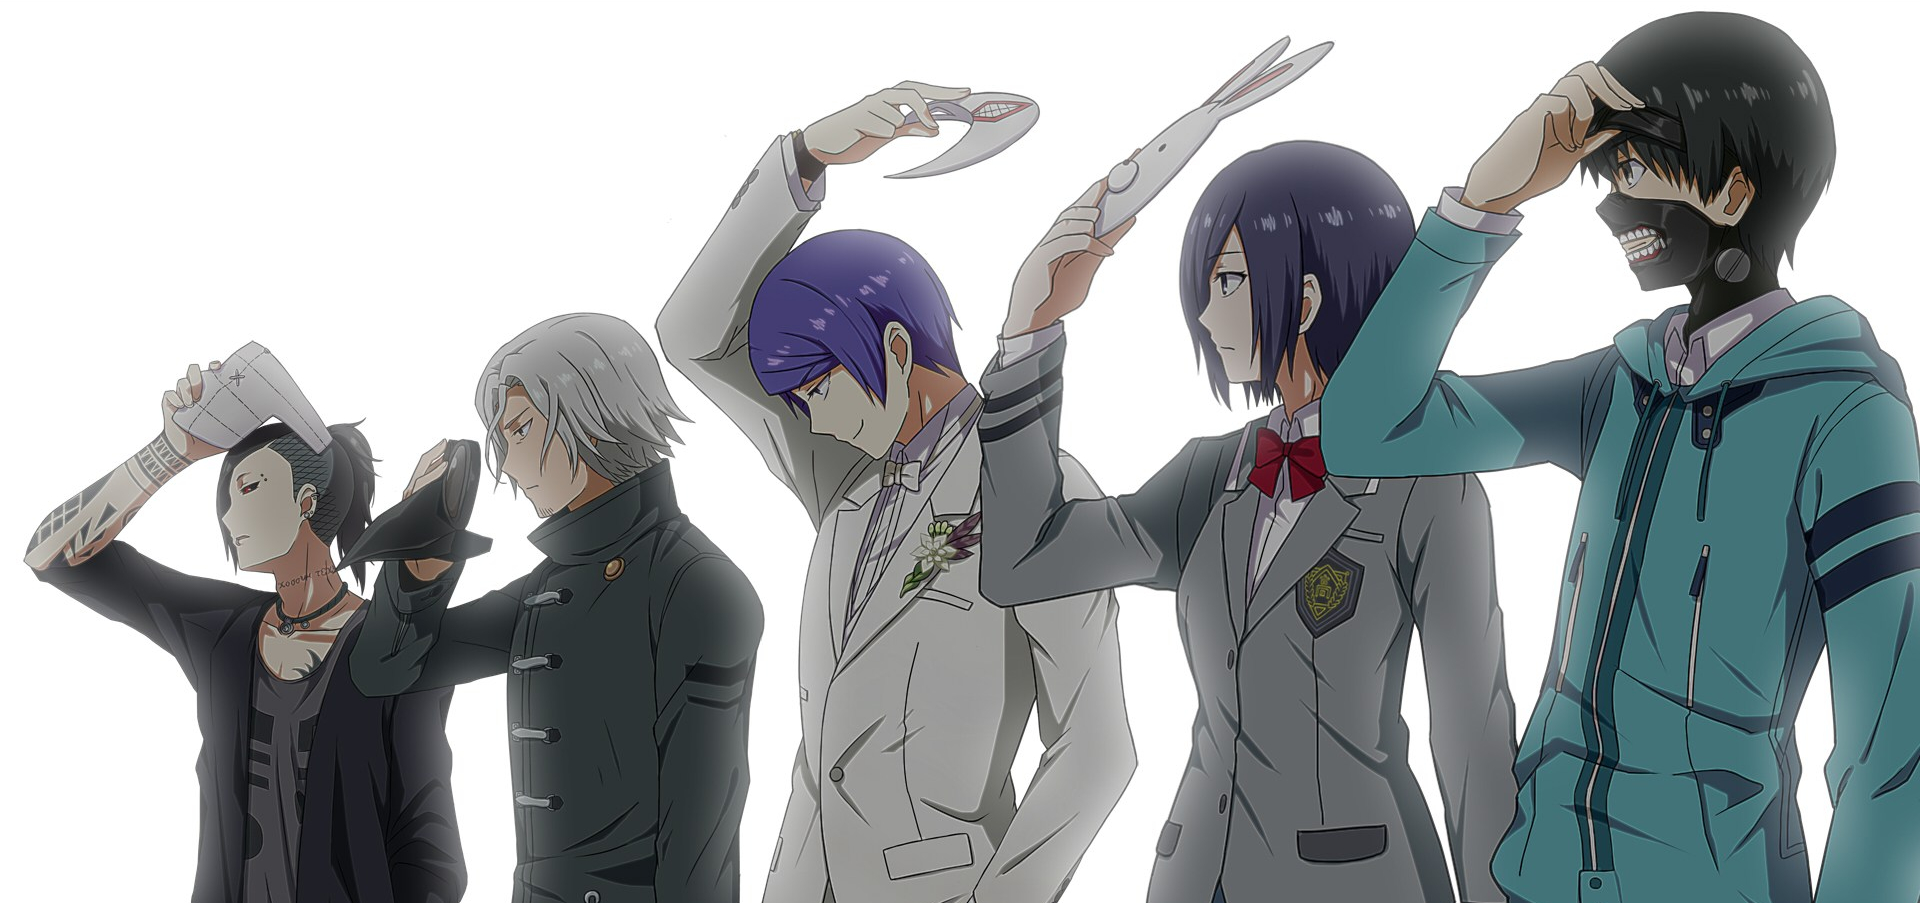 HSMediaNerd: Book, Anime, and Movie Reviews: Anime Review: Tokyo Ghoul